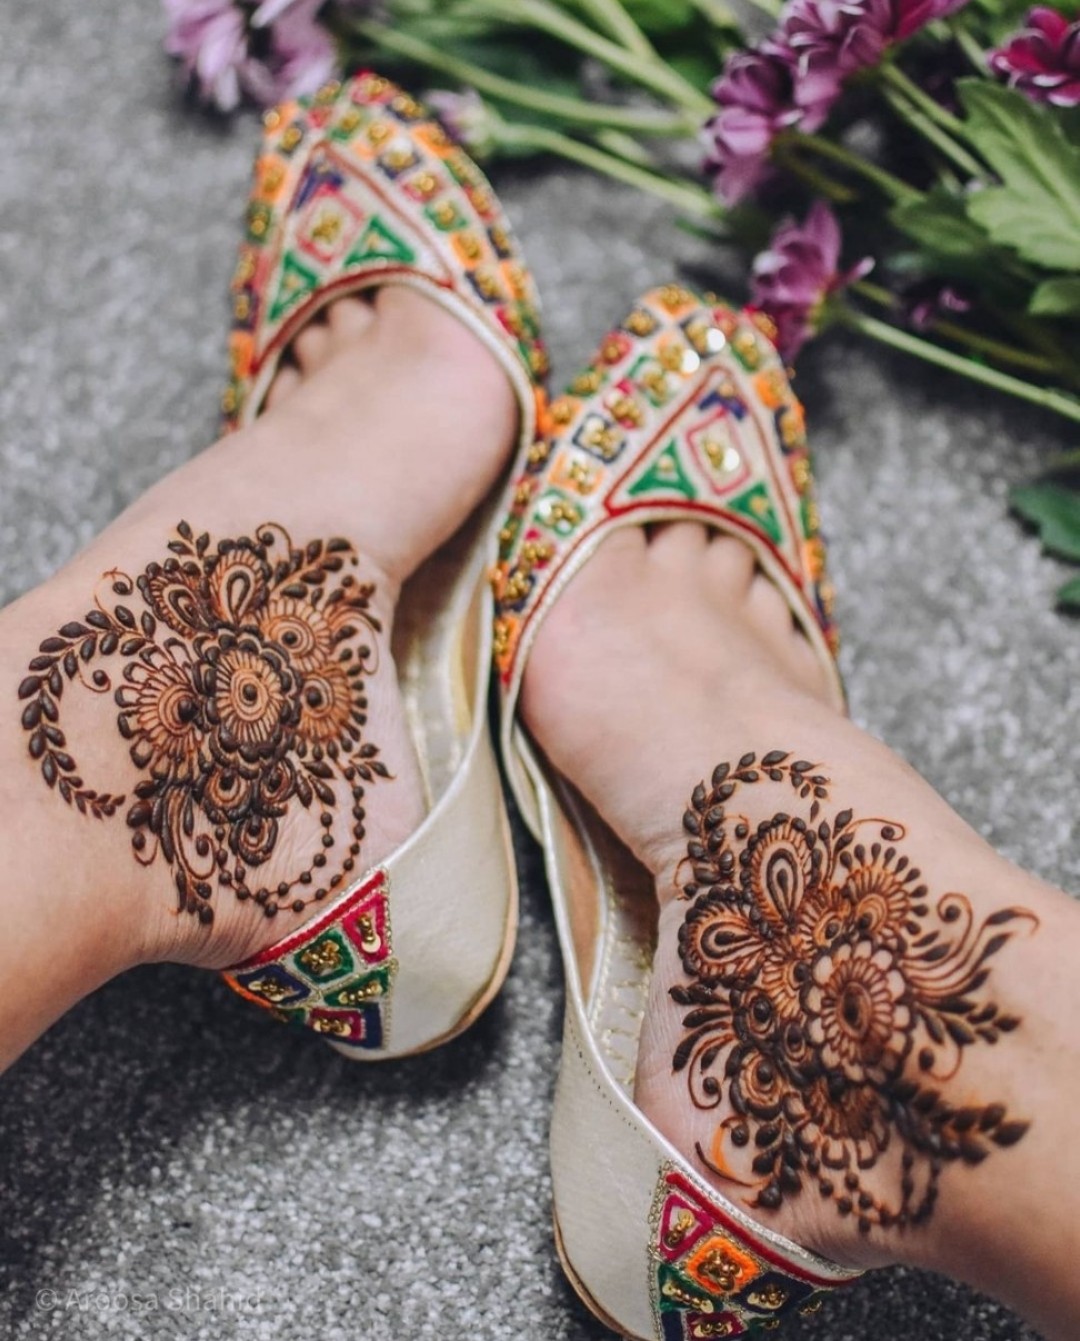 A Mix of Beautiful Mehendi Patterns For Adding a Special Touch!